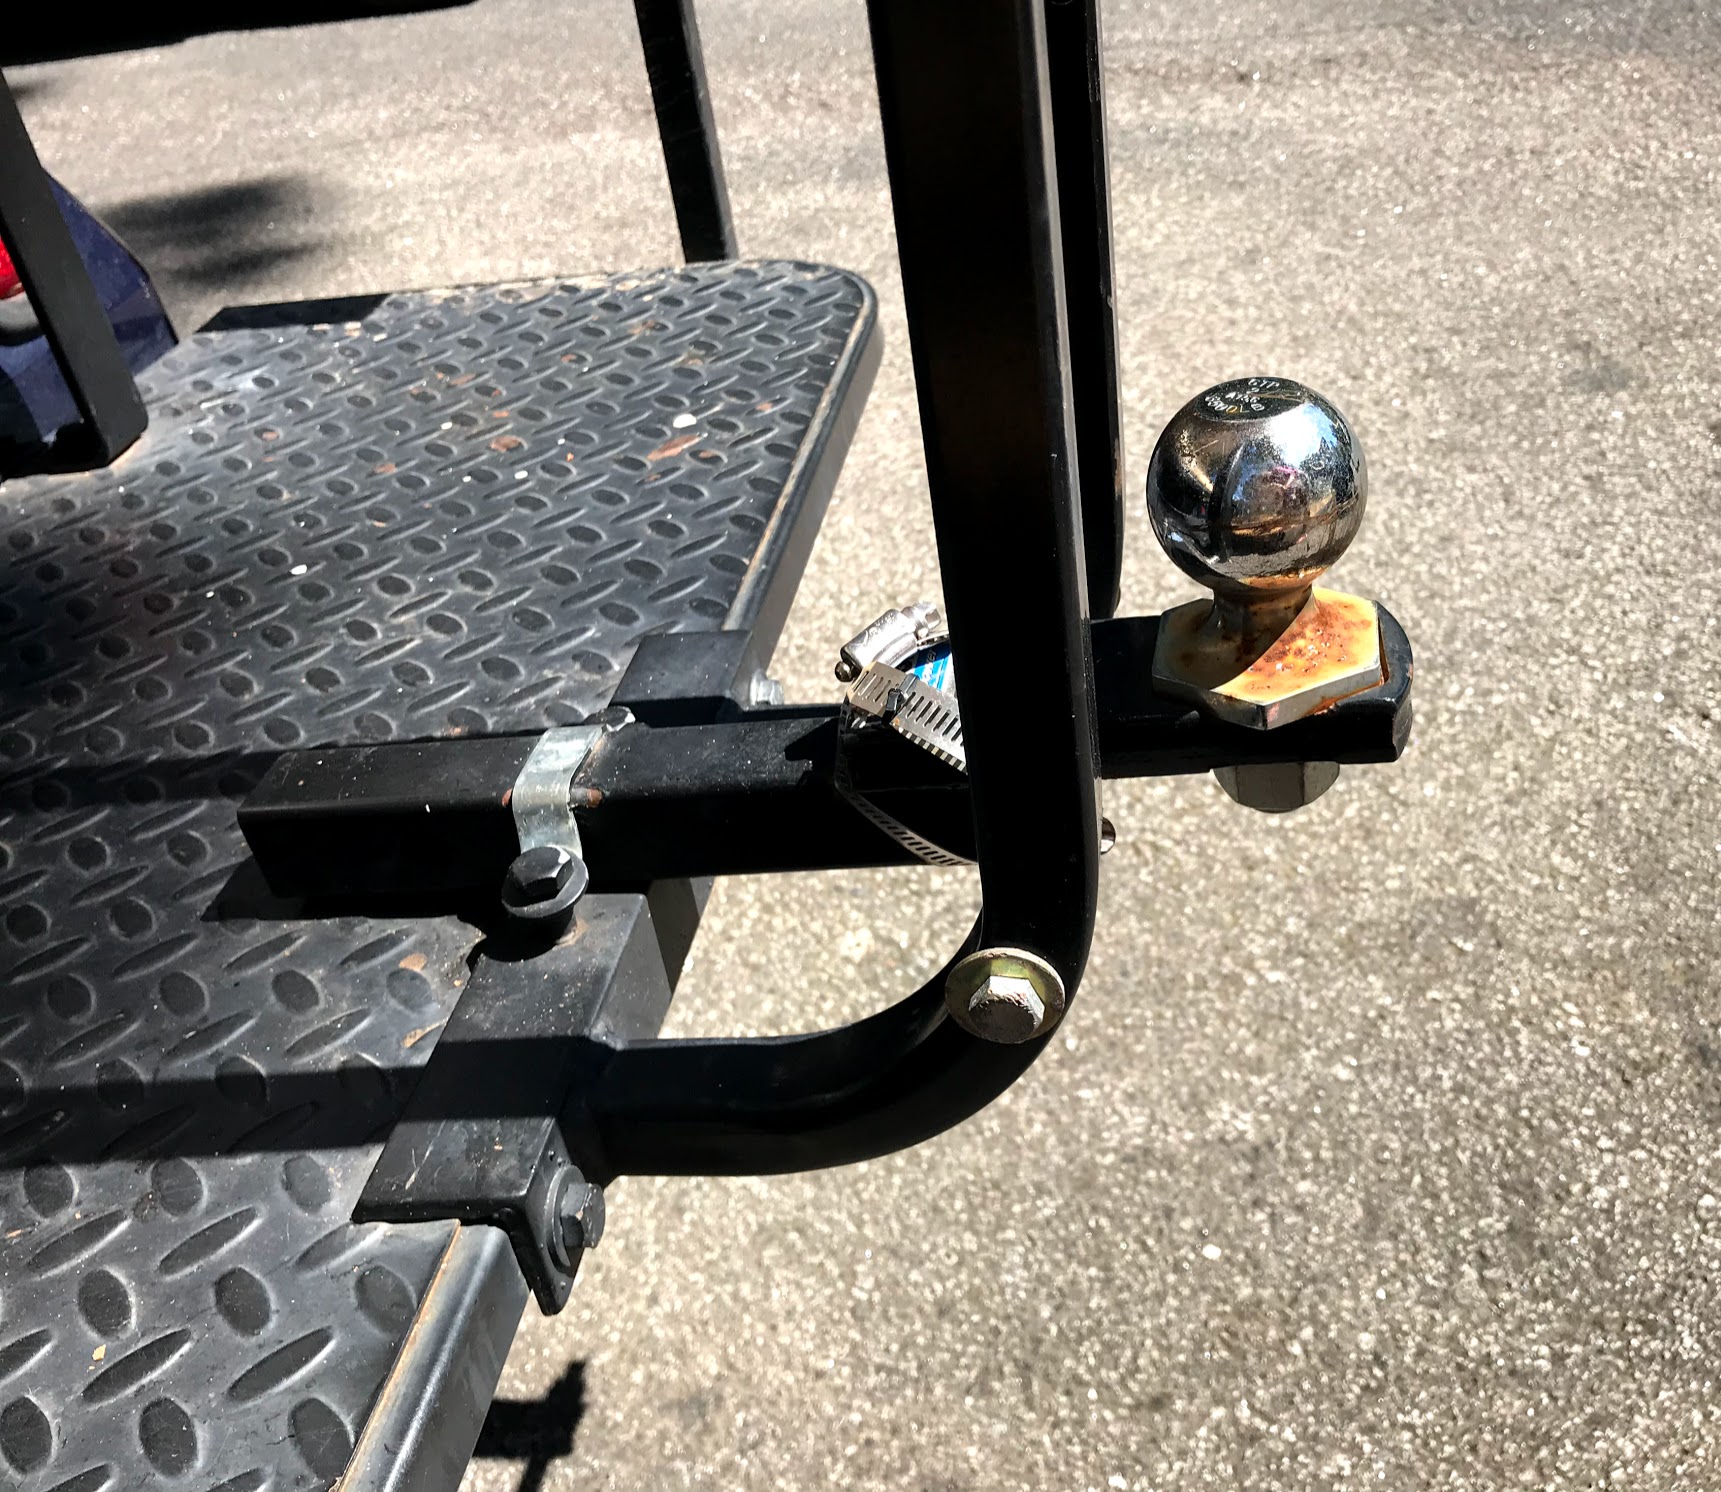 golf cart accessory for hauling